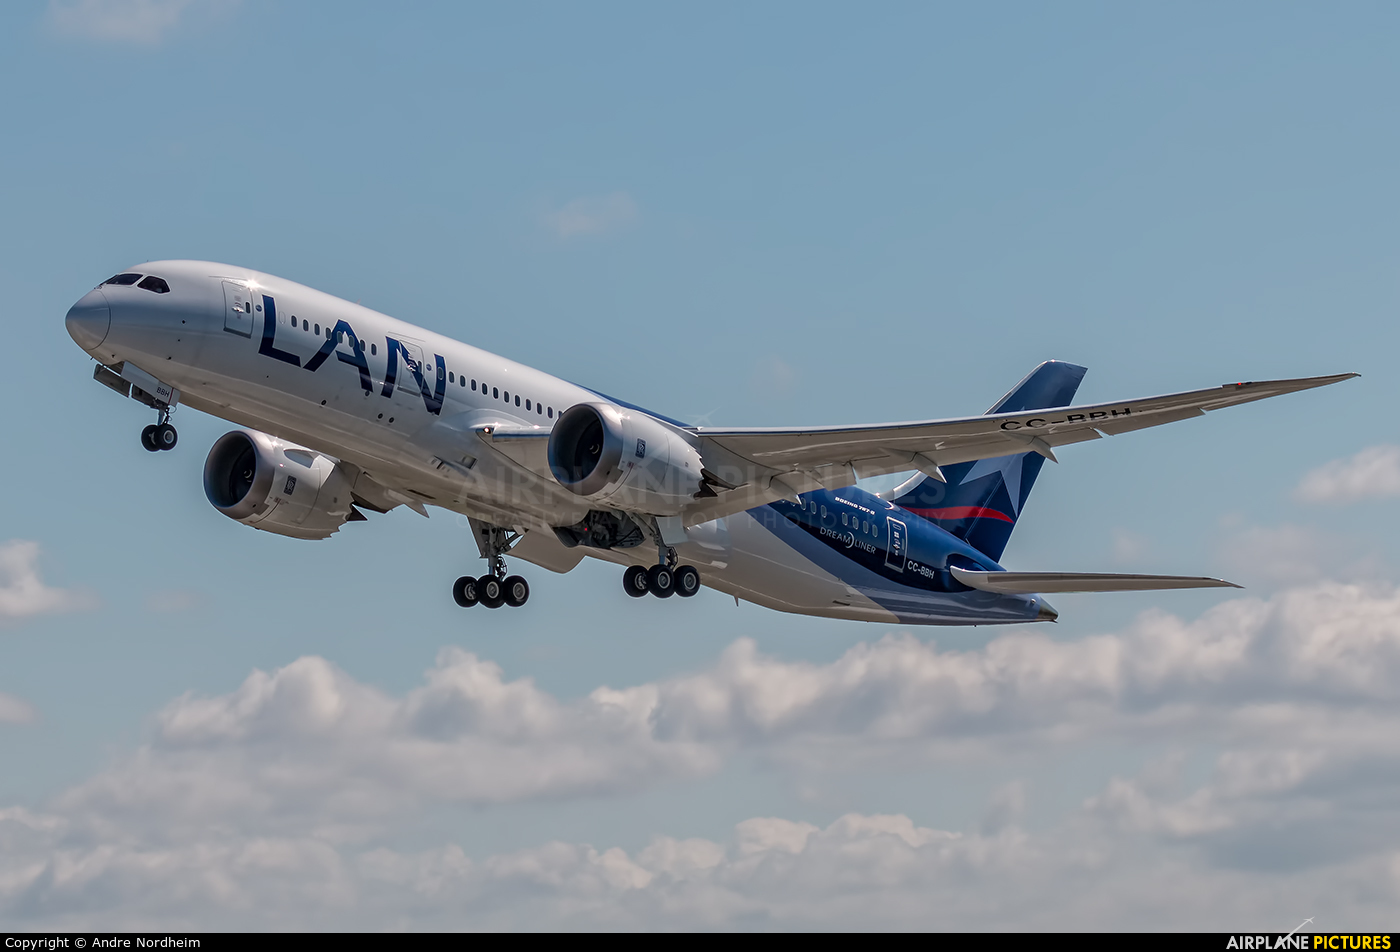 LAN Airlines CC-BBH aircraft at Everett - Snohomish County / Paine Field